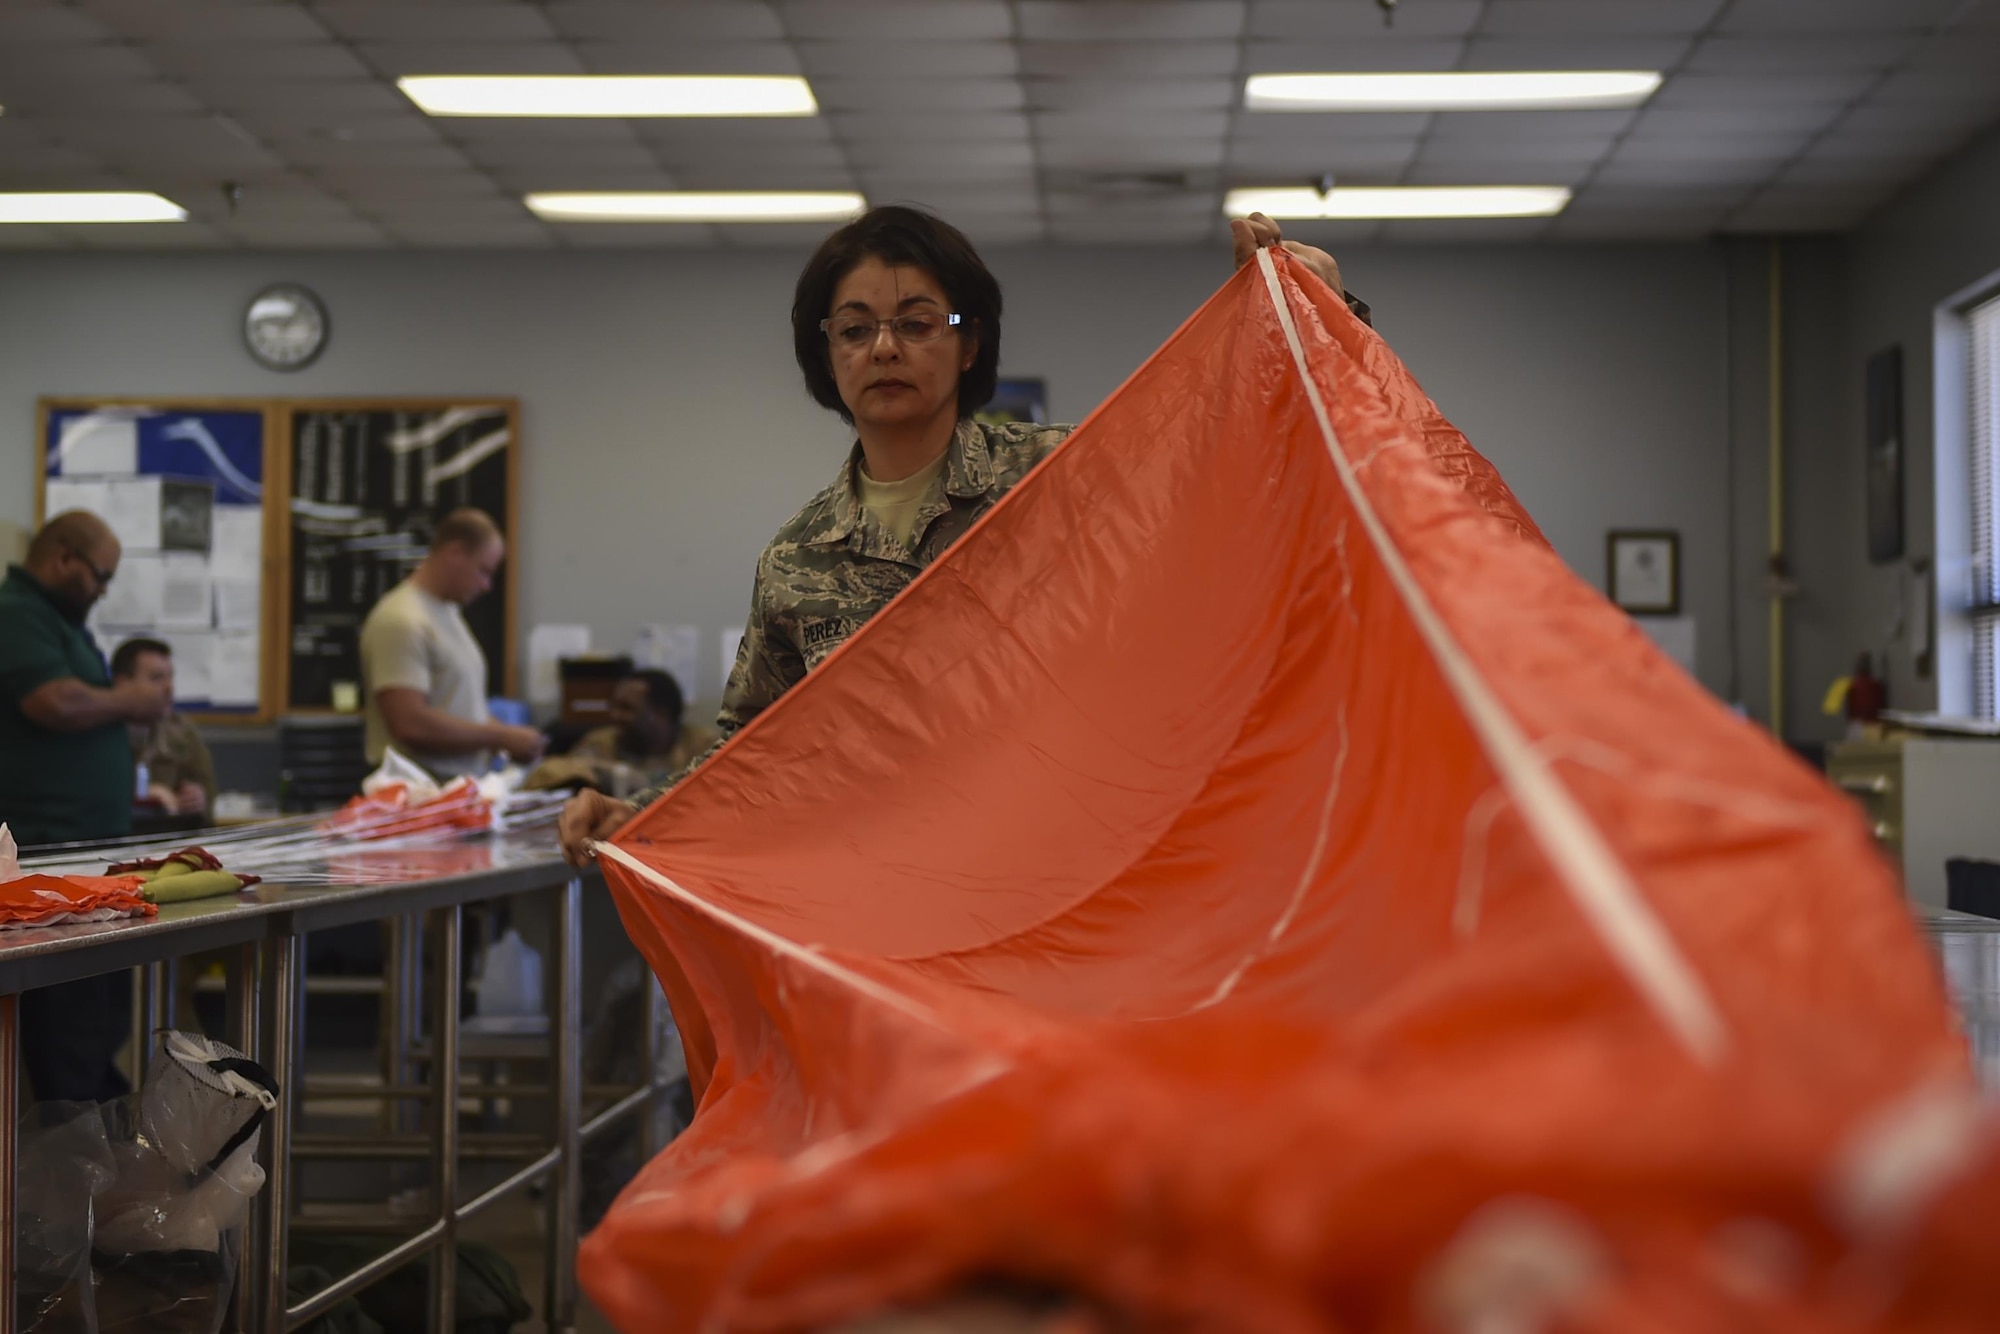 Airman 1st Class Maria Perez, an aircrew flight equipment specialist with the 4th Special Operations Squadron, checks the lines of a low-profile parachute at Hurlburt Field, Fla., Jan. 25, 2017. The LPP is configured for use in the AC-130 gunships and replaced the BA-22 parachute. The LPP weighs approximately 20 pounds, roughly half of the BA-22. (U.S. Air Force photo by Airman 1st Class Joseph Pick)